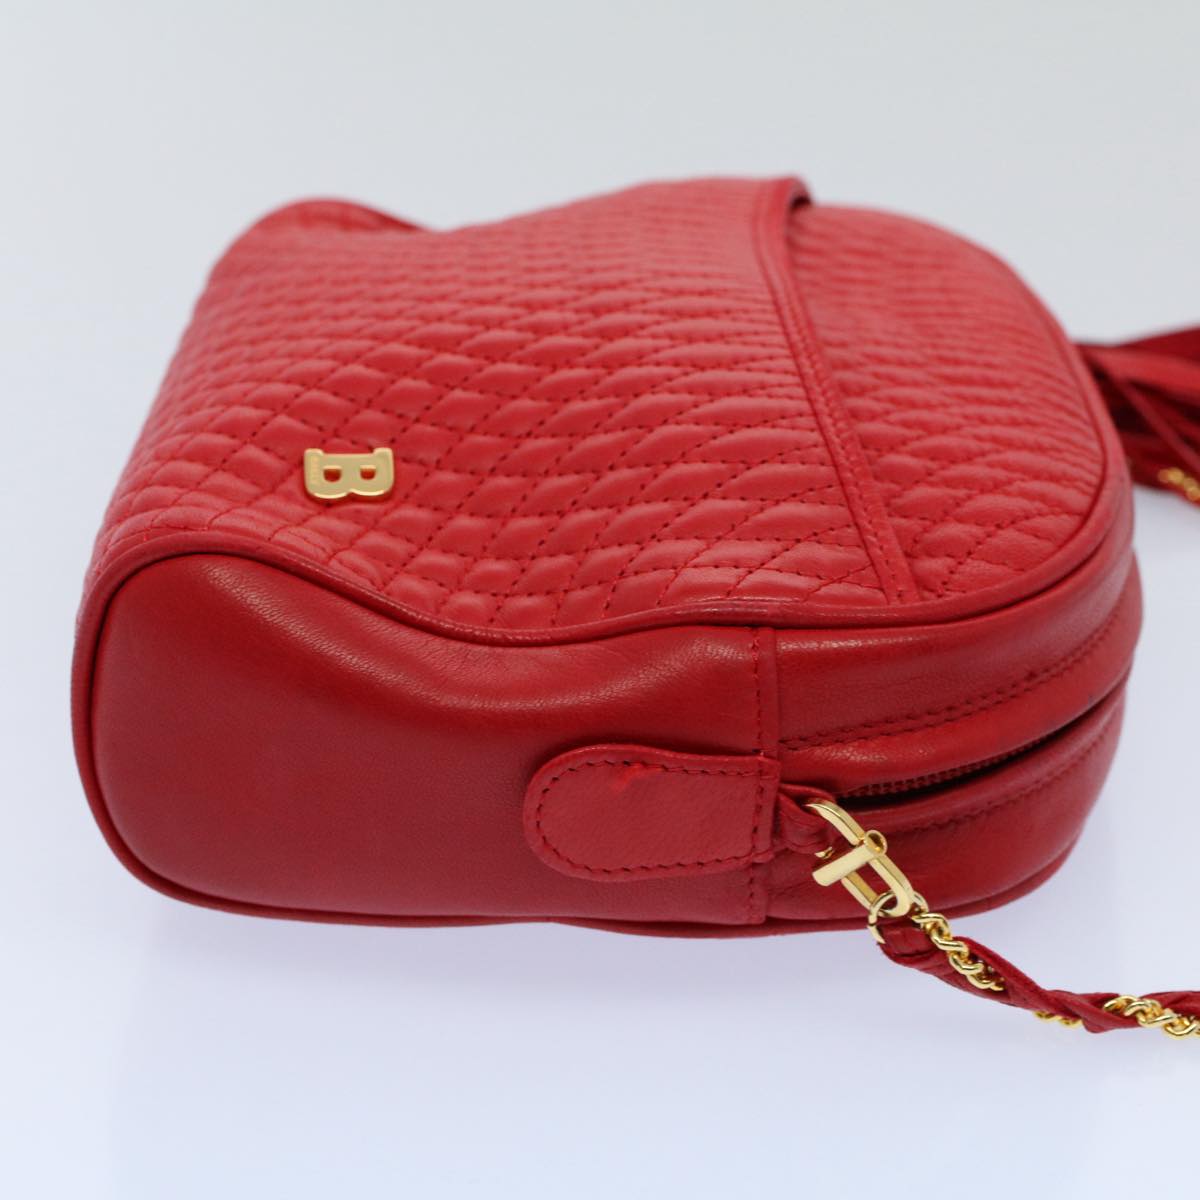 Bally Quilted Chain Shoulder Bag Leather Red Auth Am5028